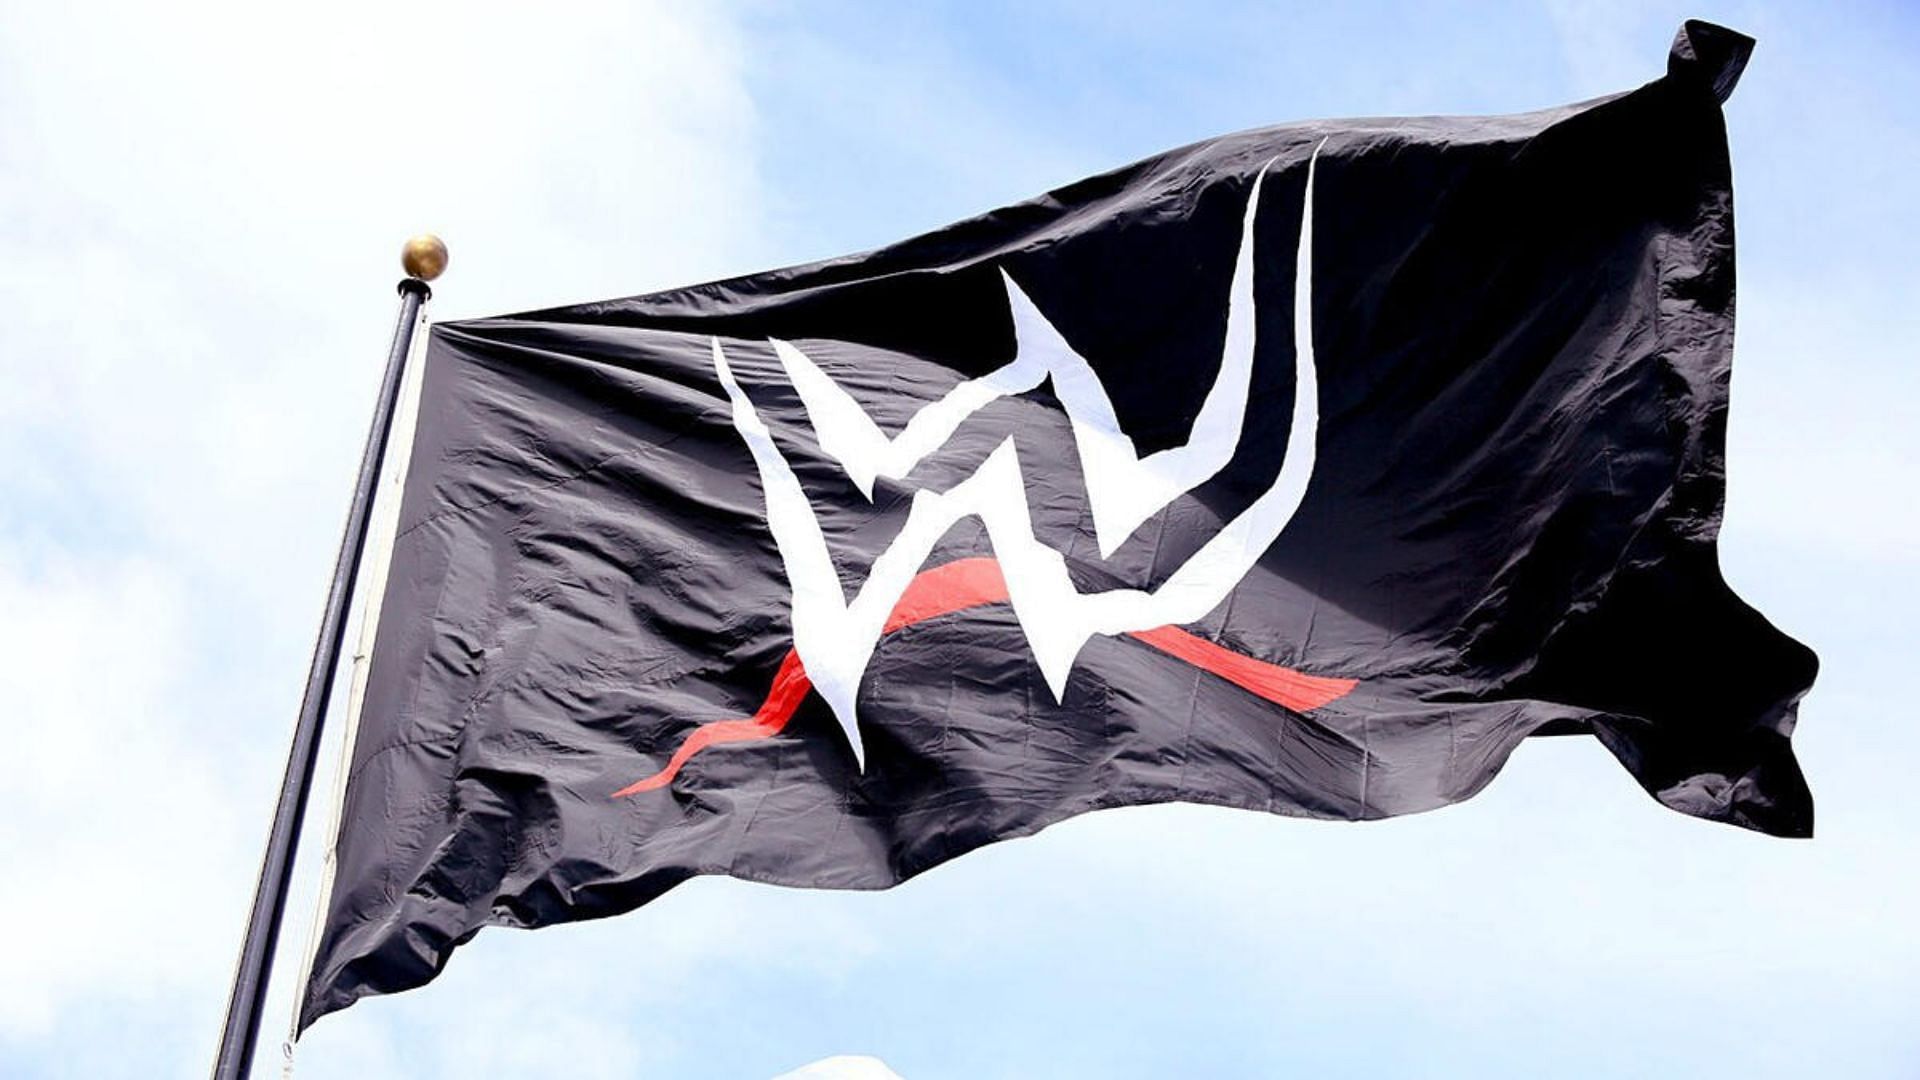 World Wrestling Entertainment is based in Stamford, Connecticut. (Credit: WWE)